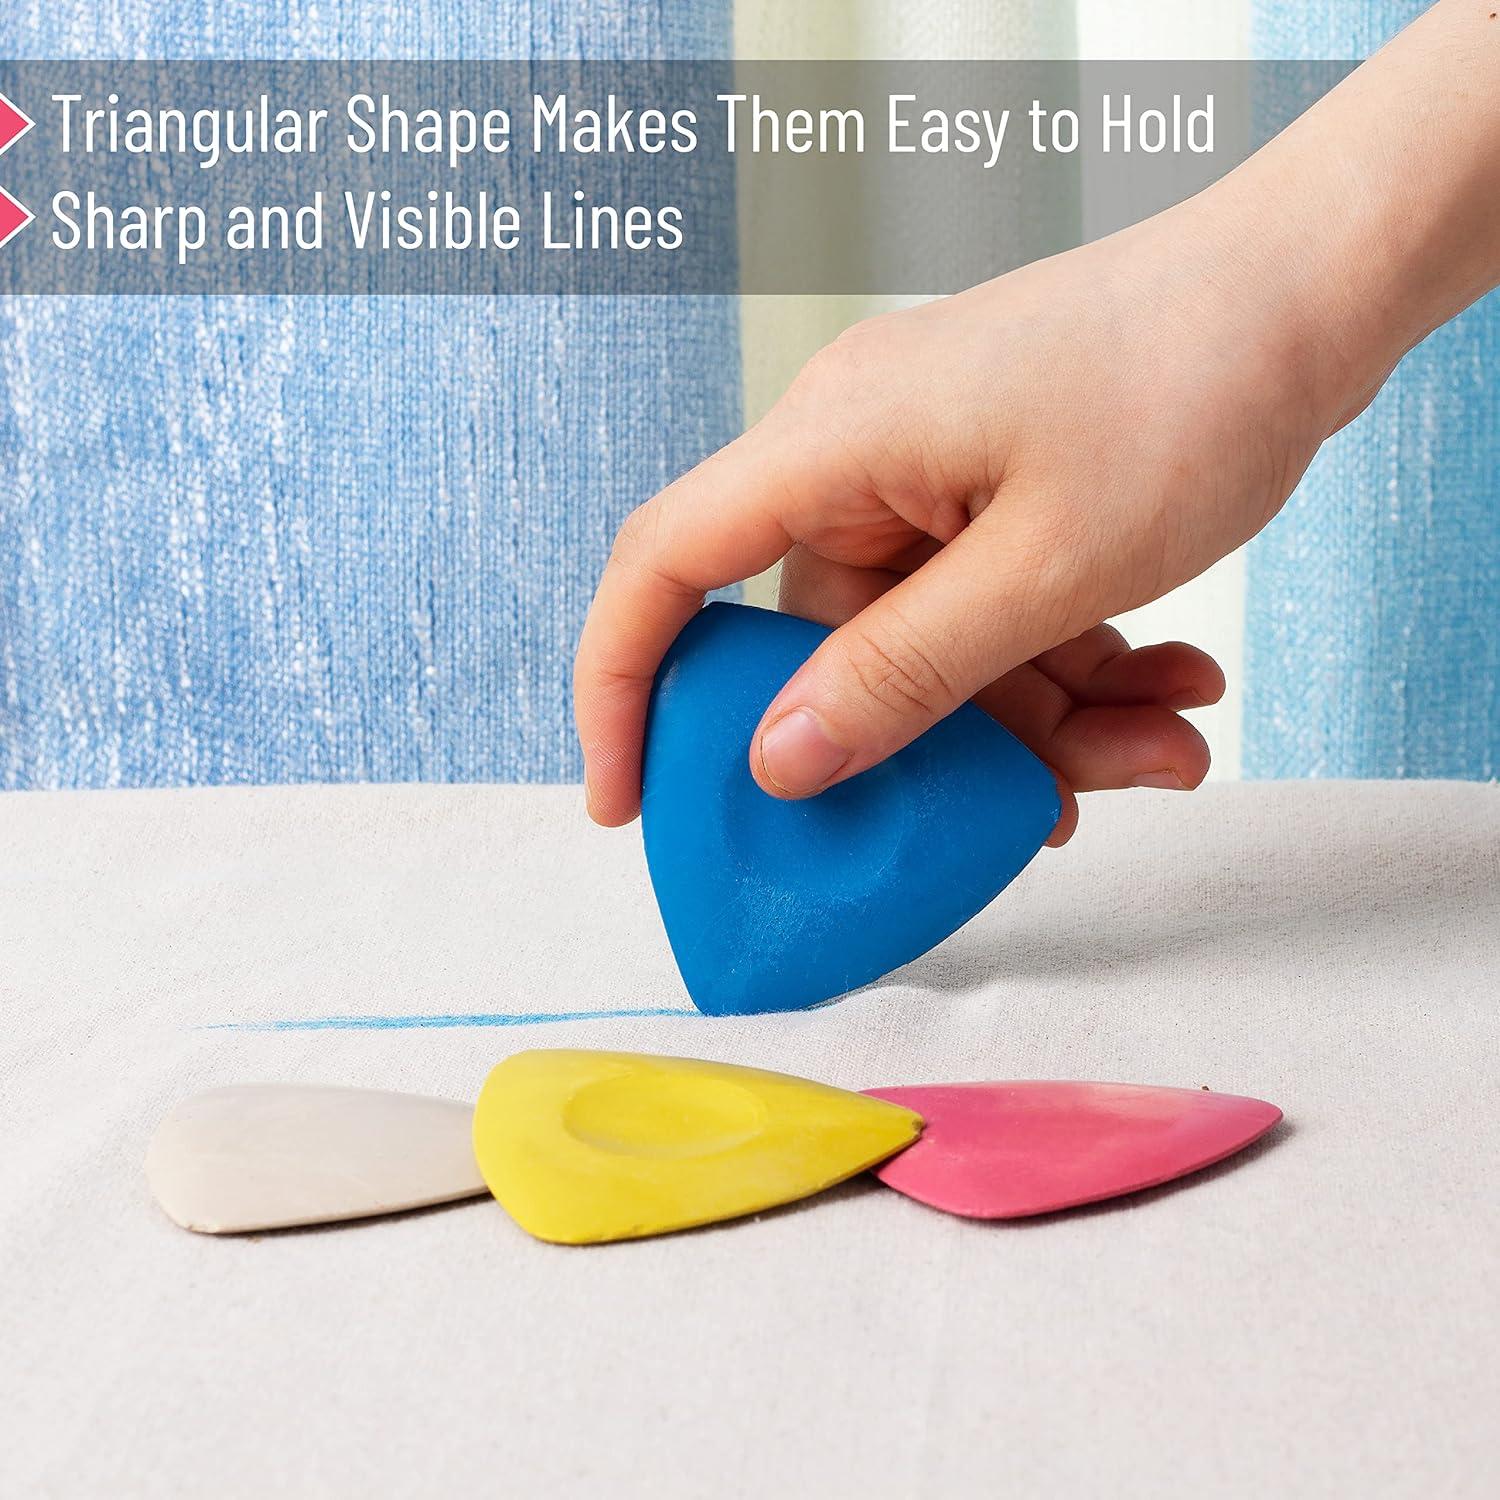 tailors' chalk triangular sewing accessories for